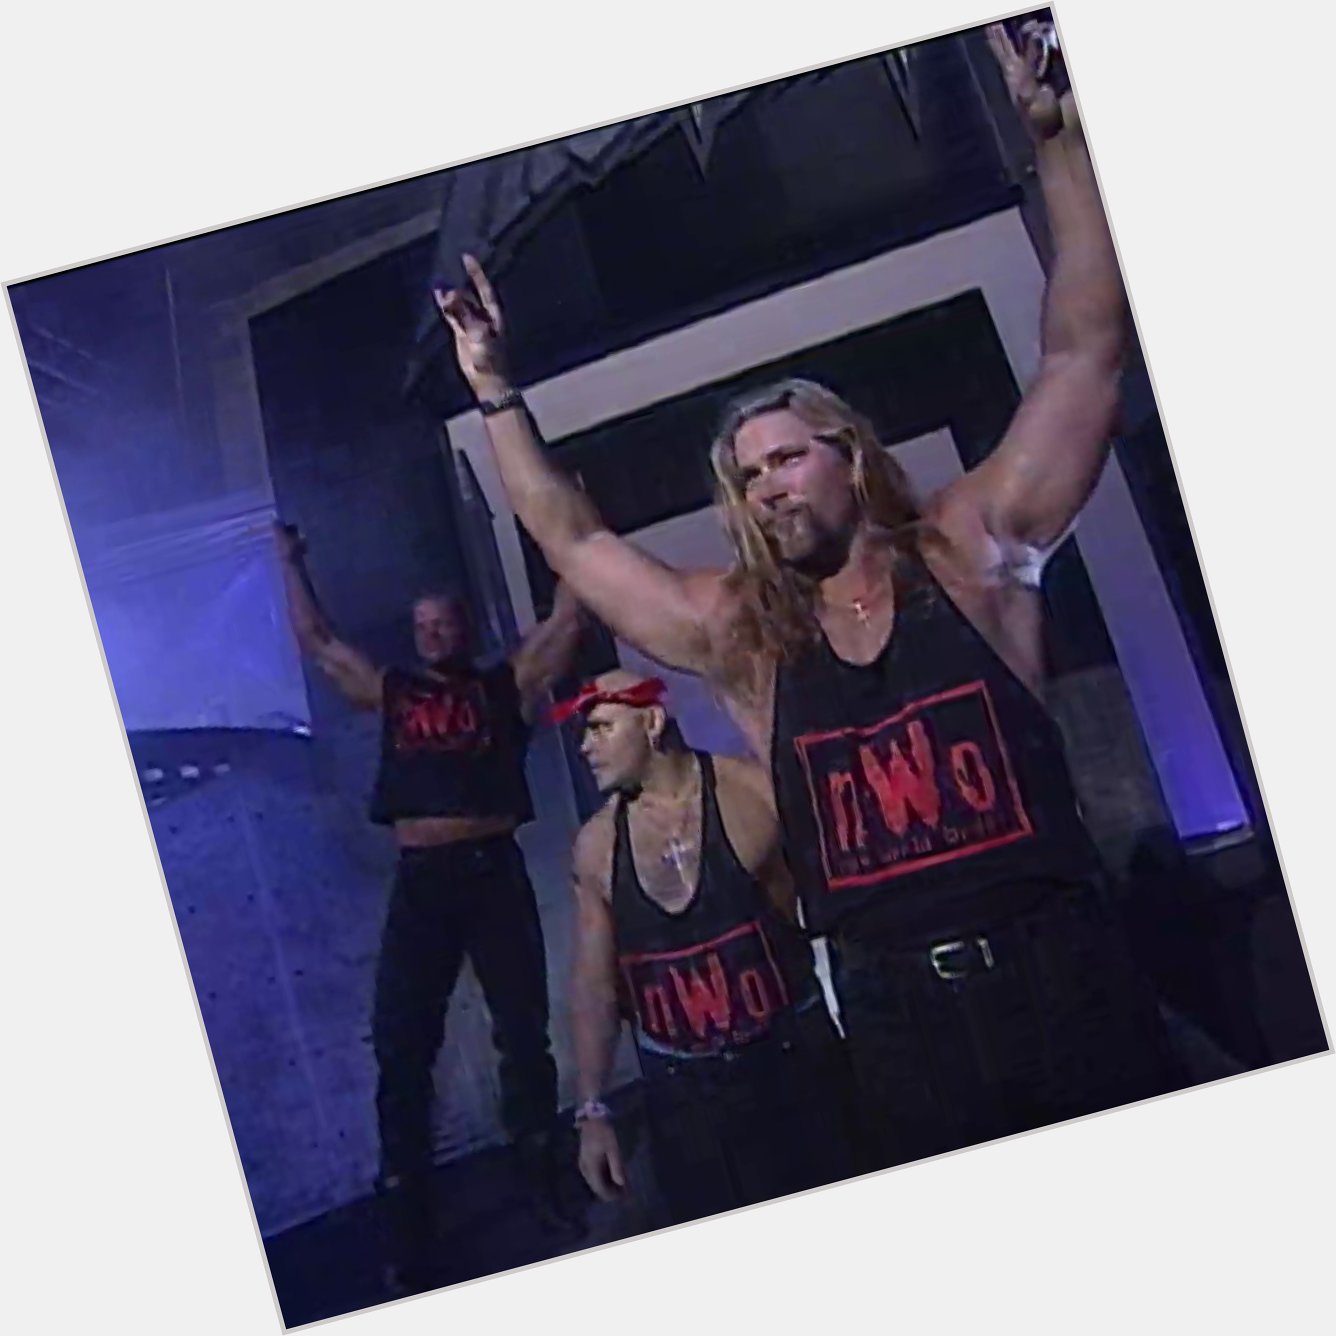 When you hear that Wolf howl, business picked up. 

Happy birthday, Kevin Nash!  